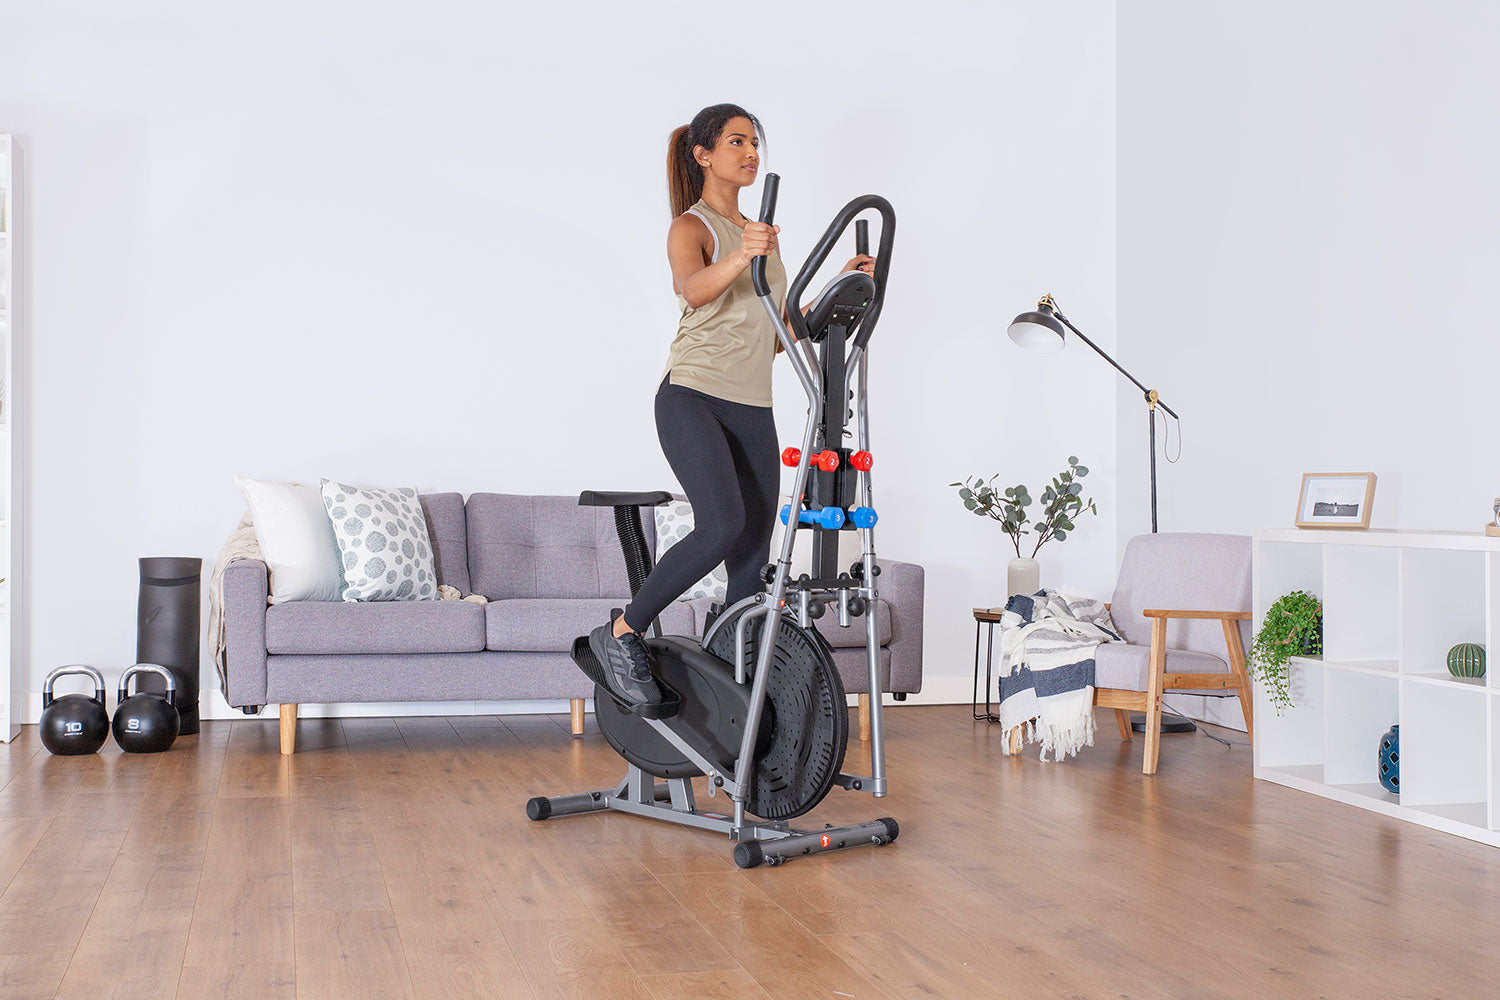 How good is a cross trainer for losing weight?